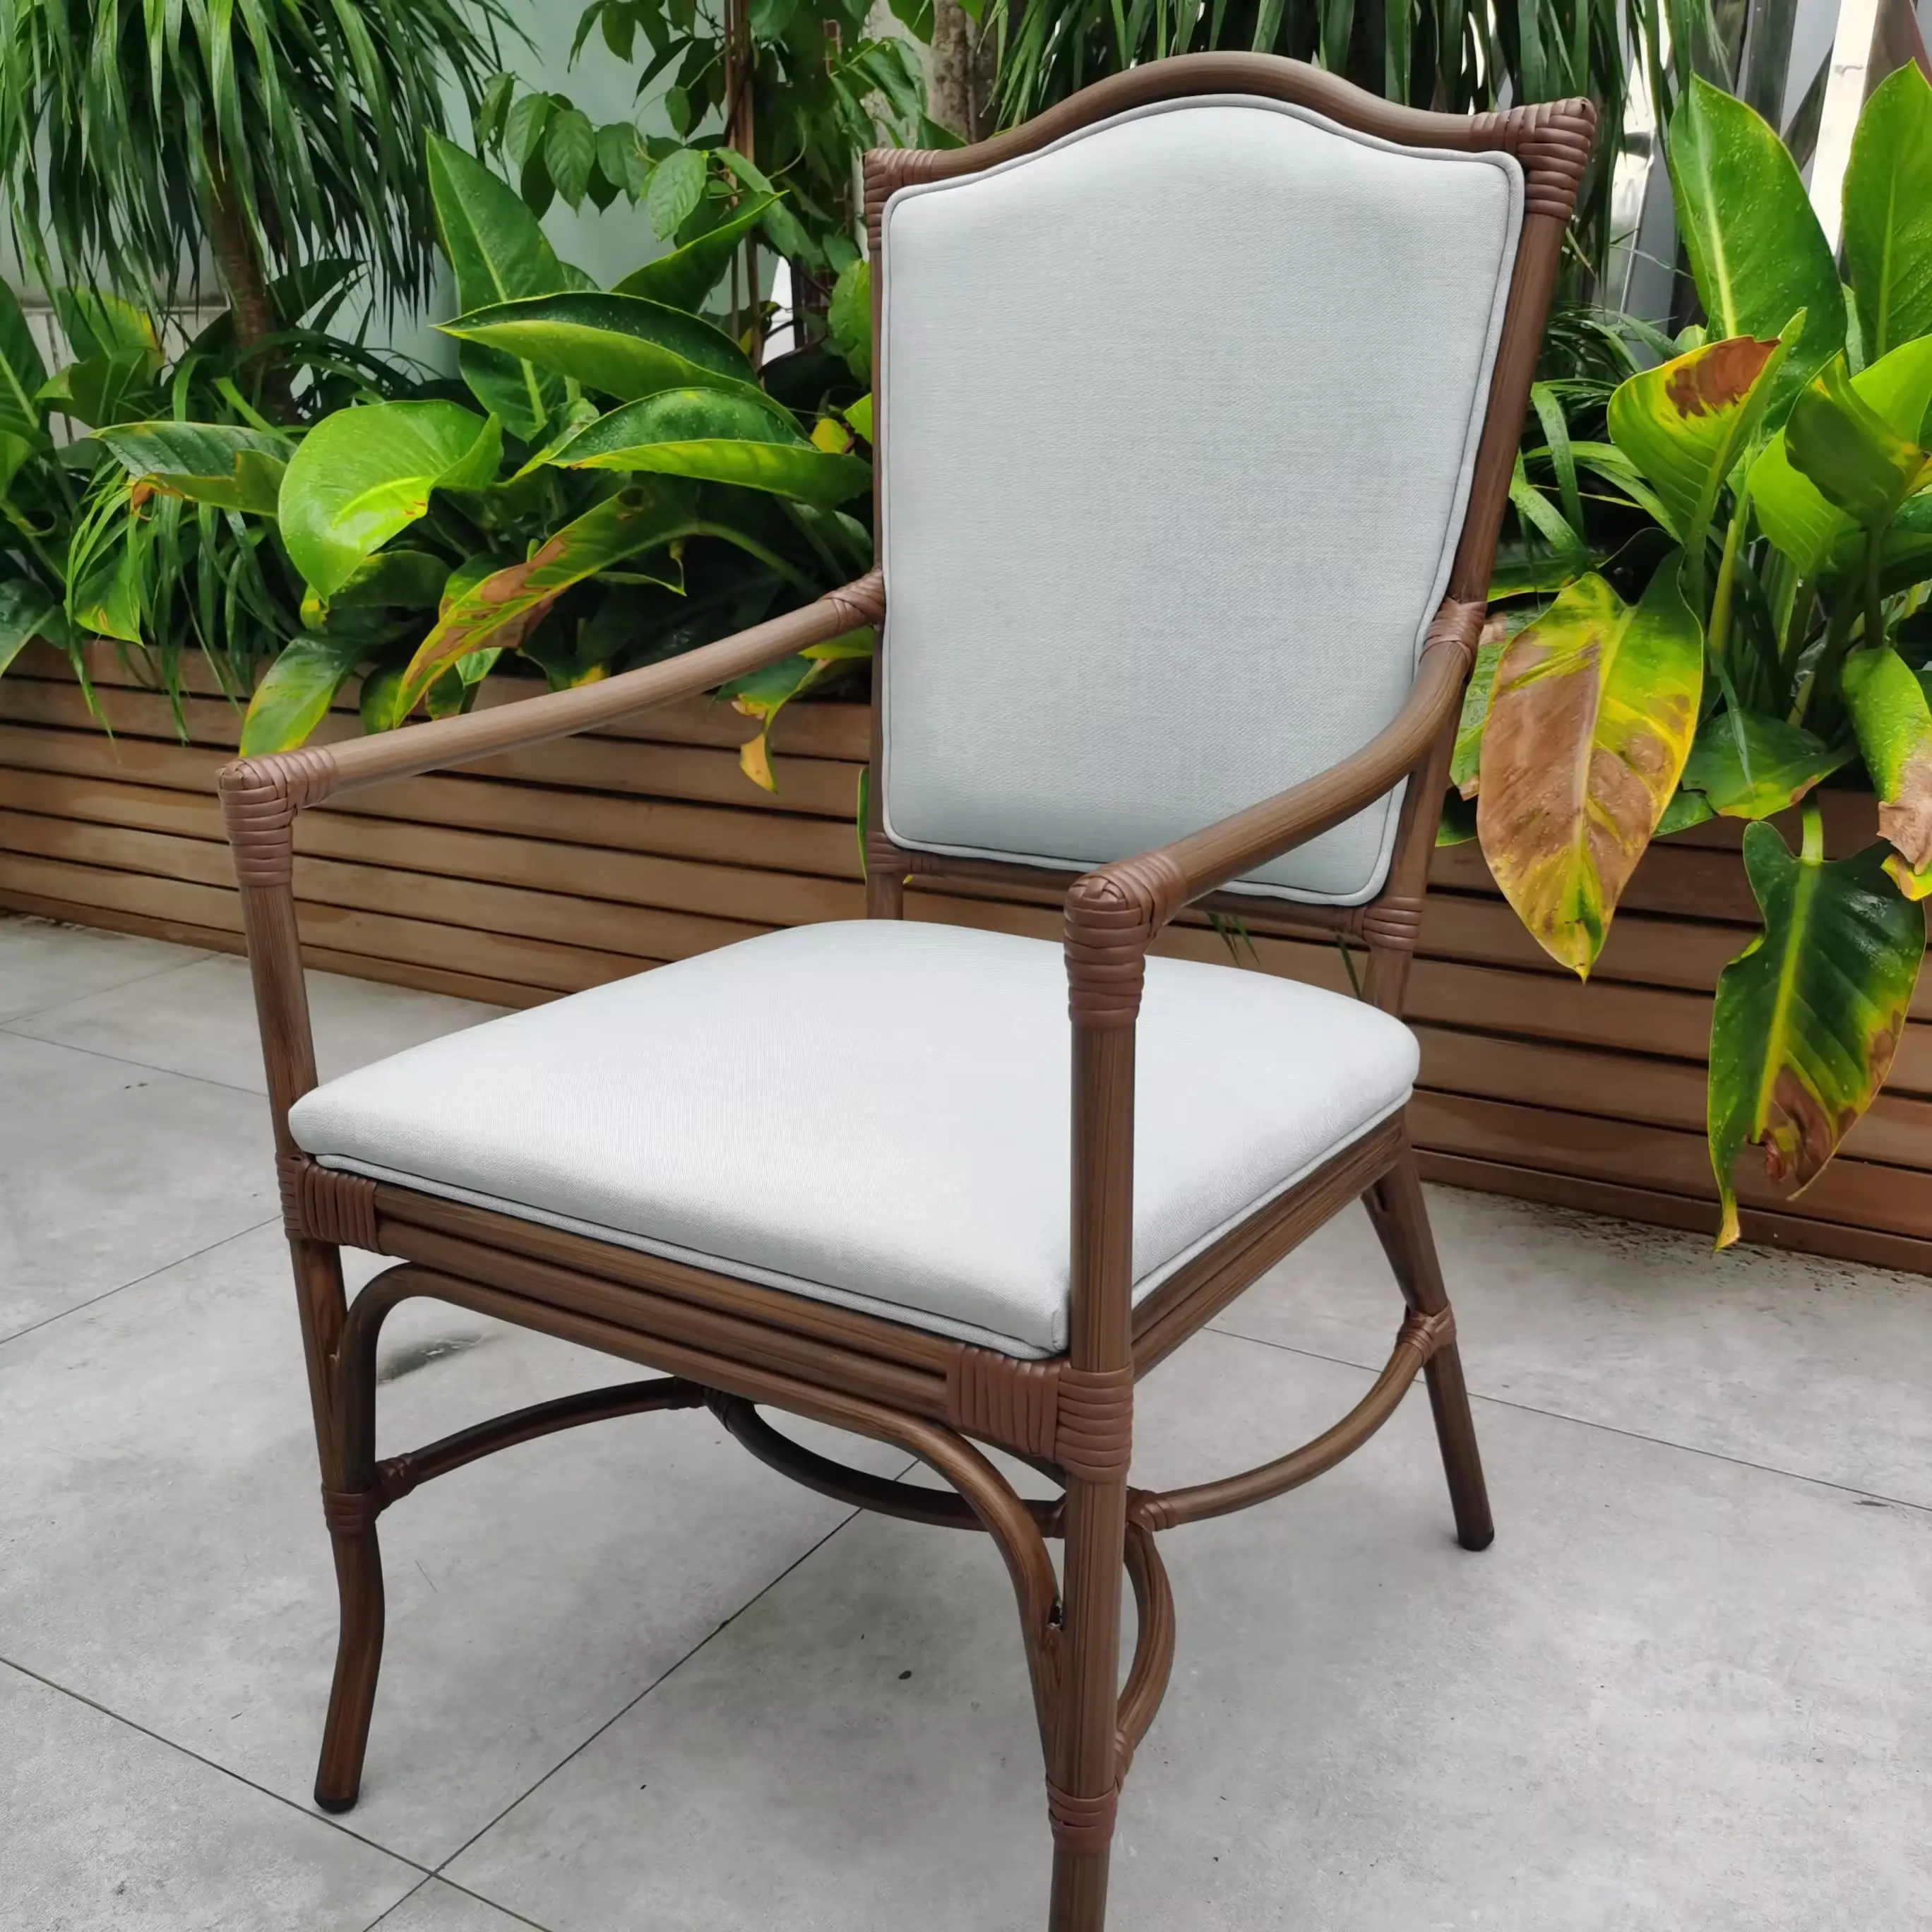 Modern Design Style Outdoor Rattan Chair Rattan Armchair with Cushion for Patio